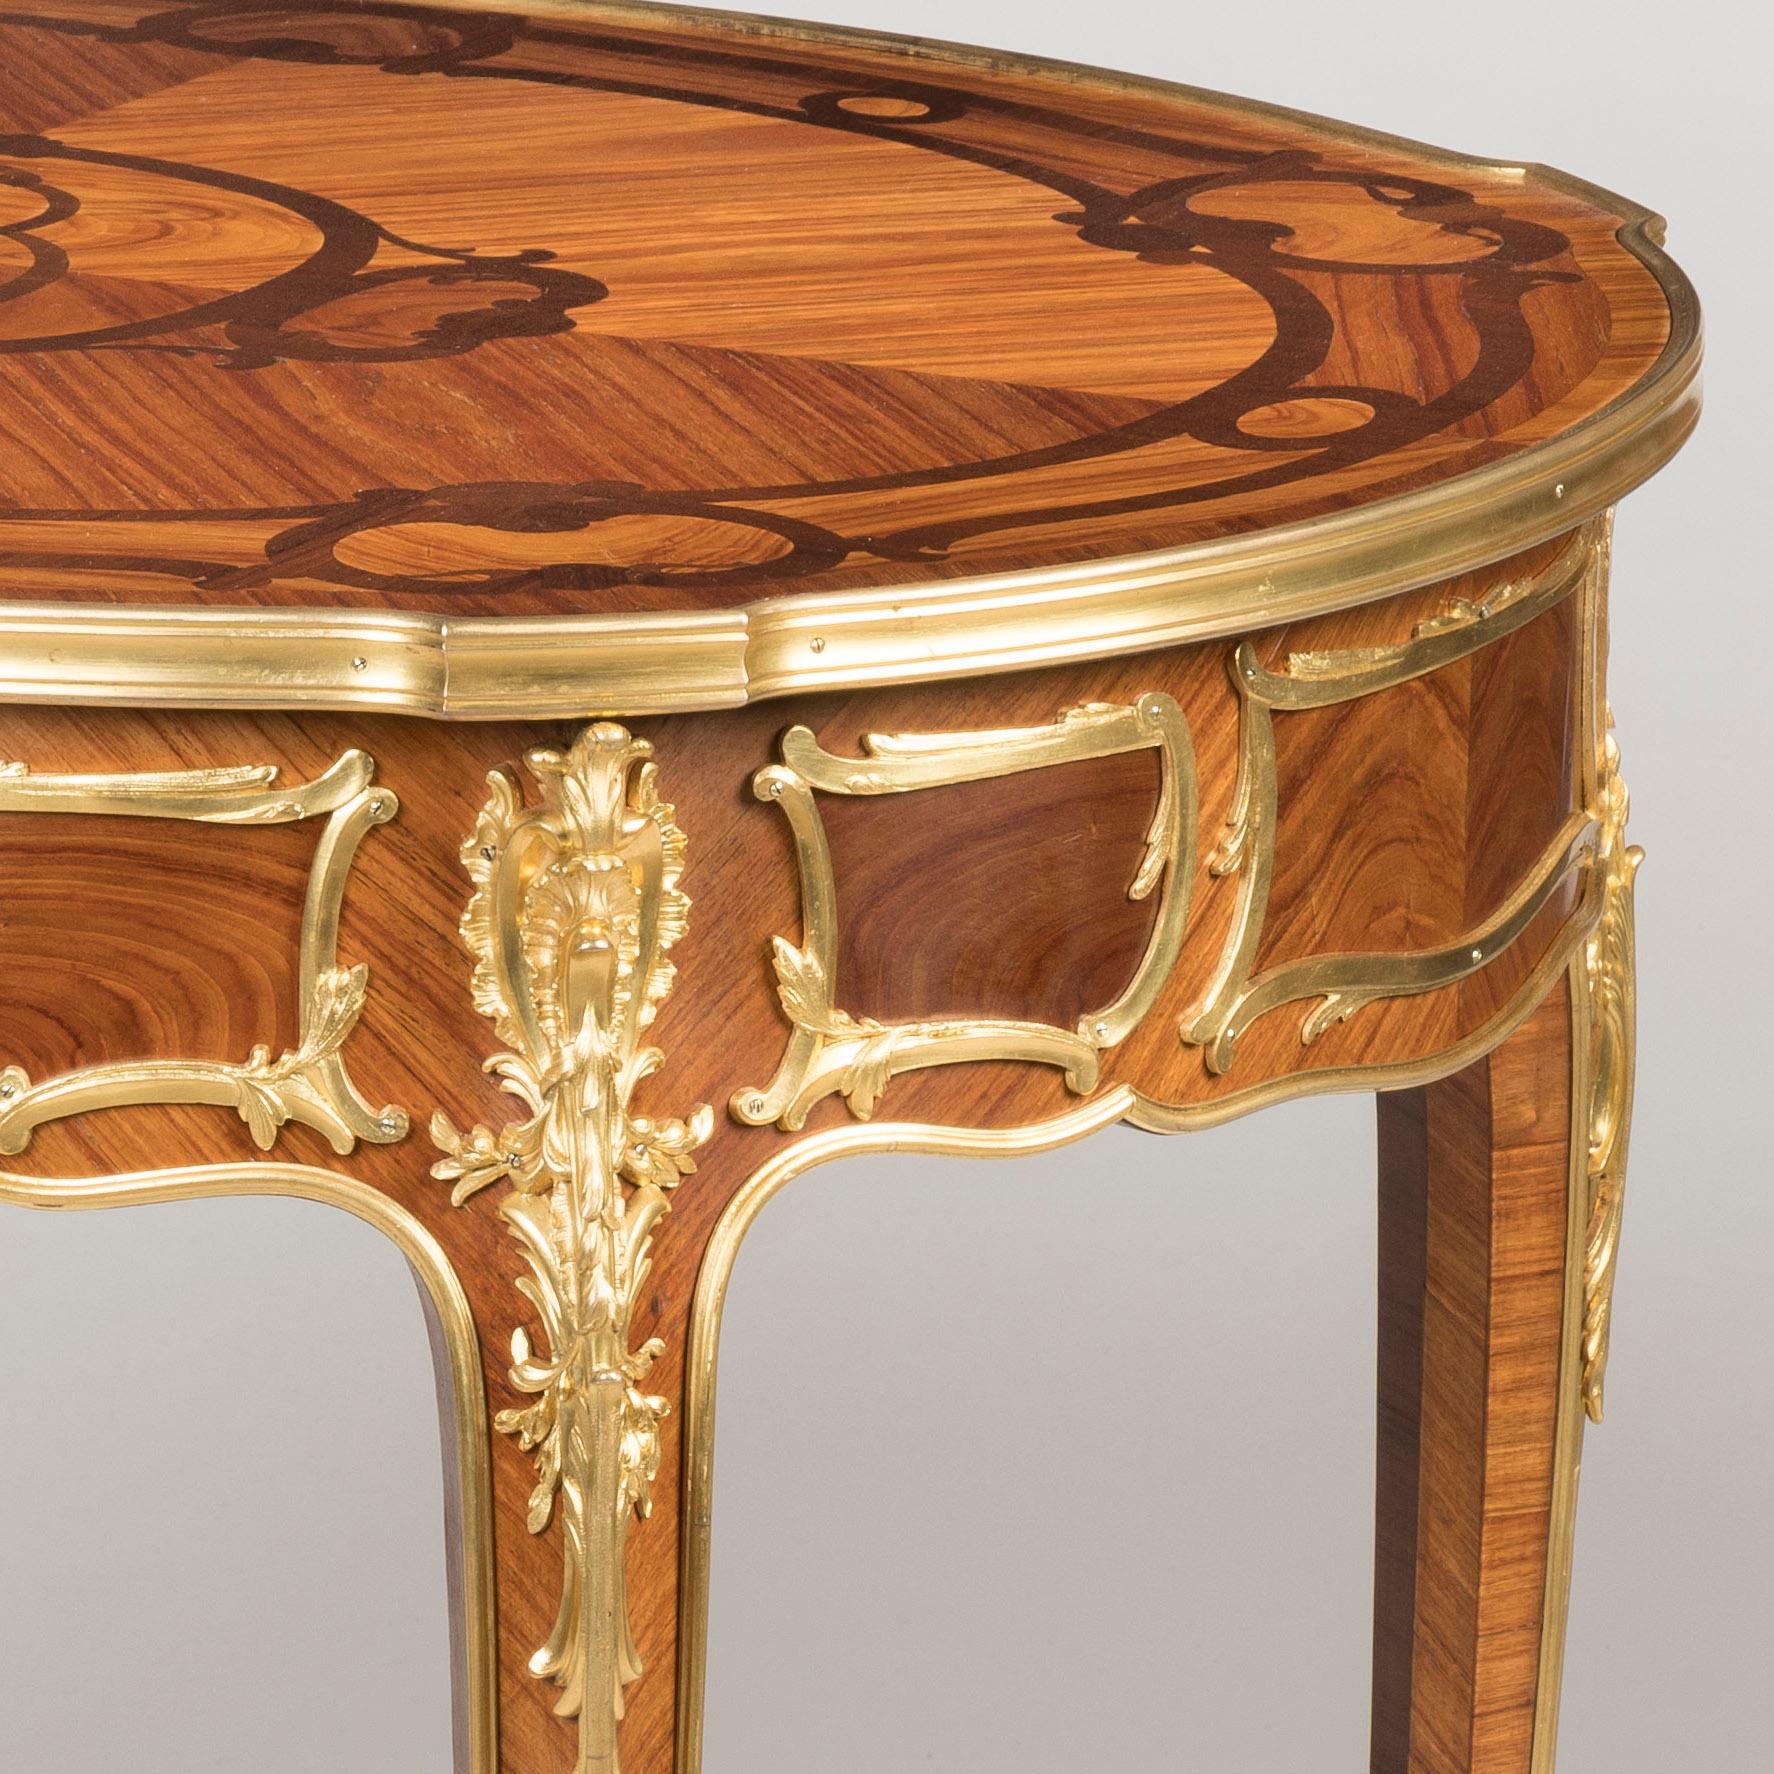 19th Century French Tulipwood Table in the Louis XVI Style For Sale 3